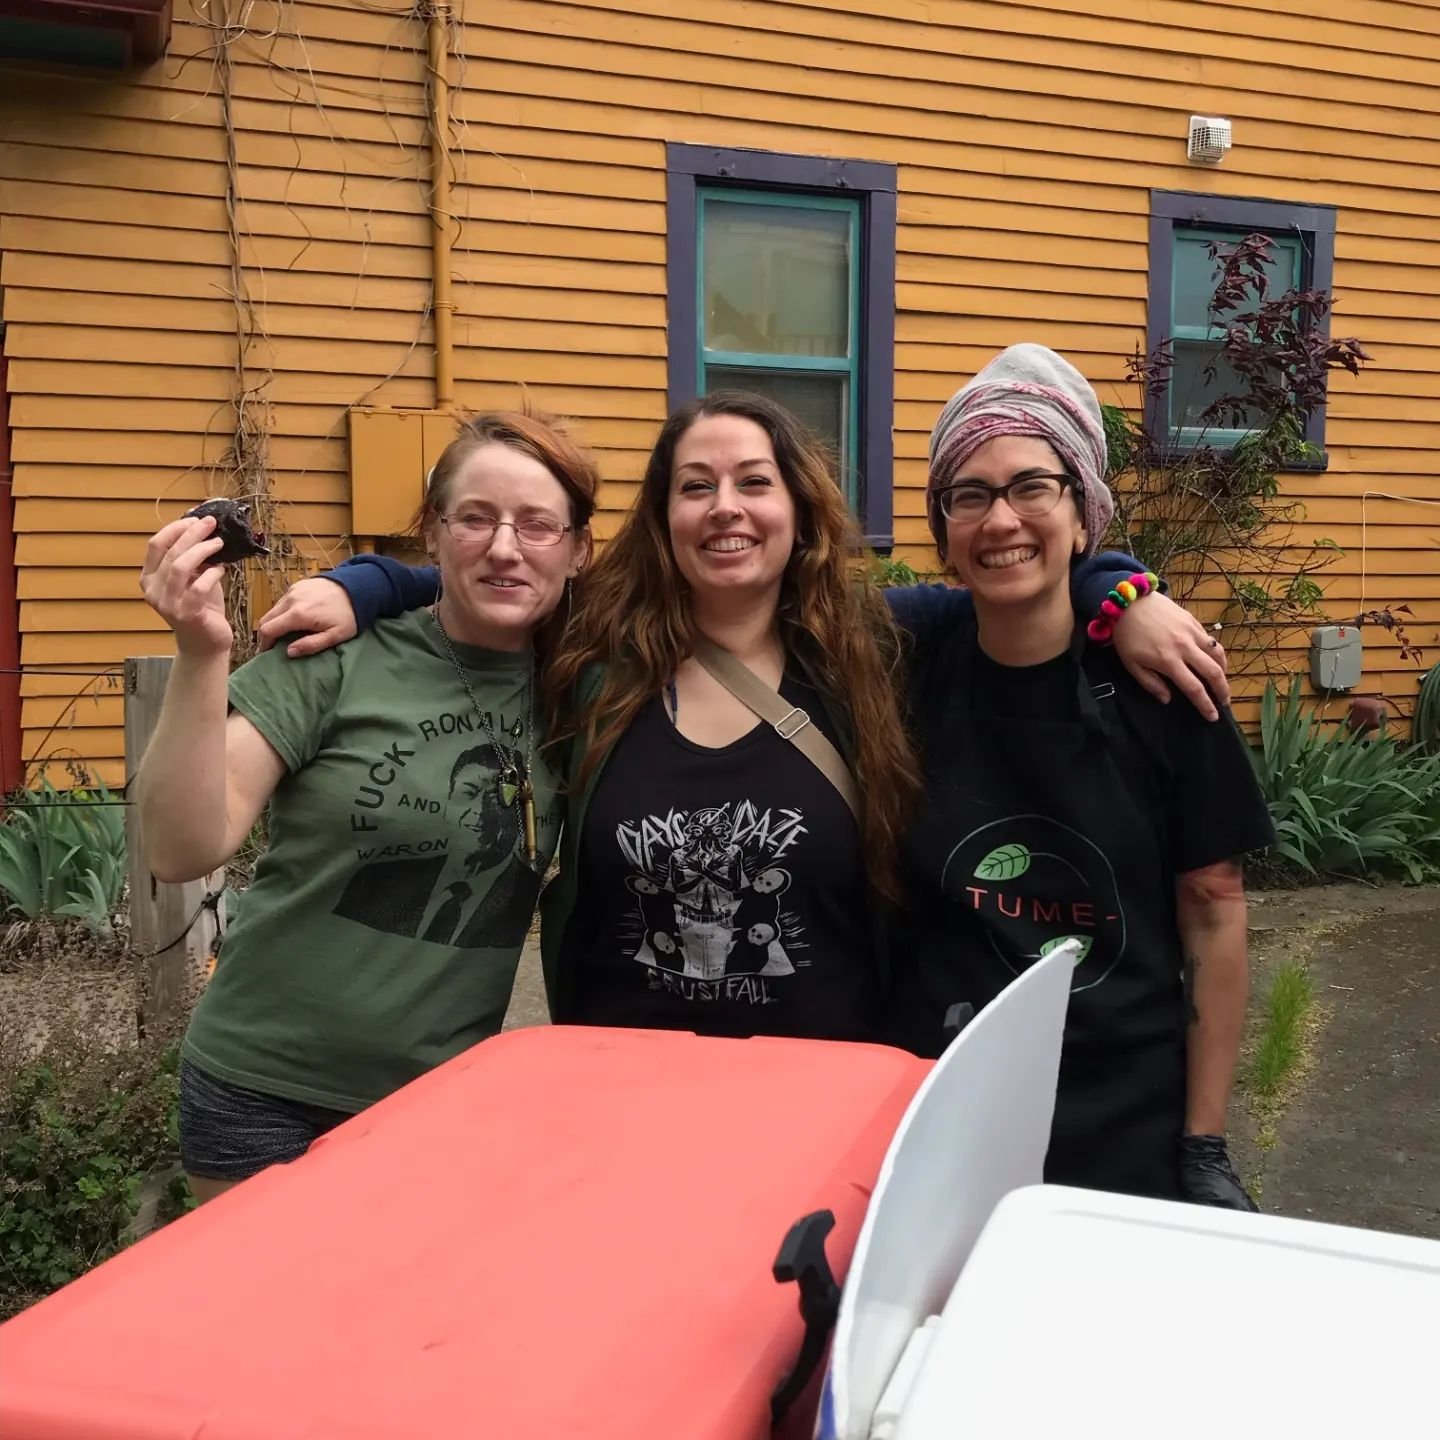 As my days in Portland come to an end I just want to thank these two amazing women right here.

Without them this pop-up wouldn't have happened, there was SO many things logistically we had to figure out to make this work and there were days where we